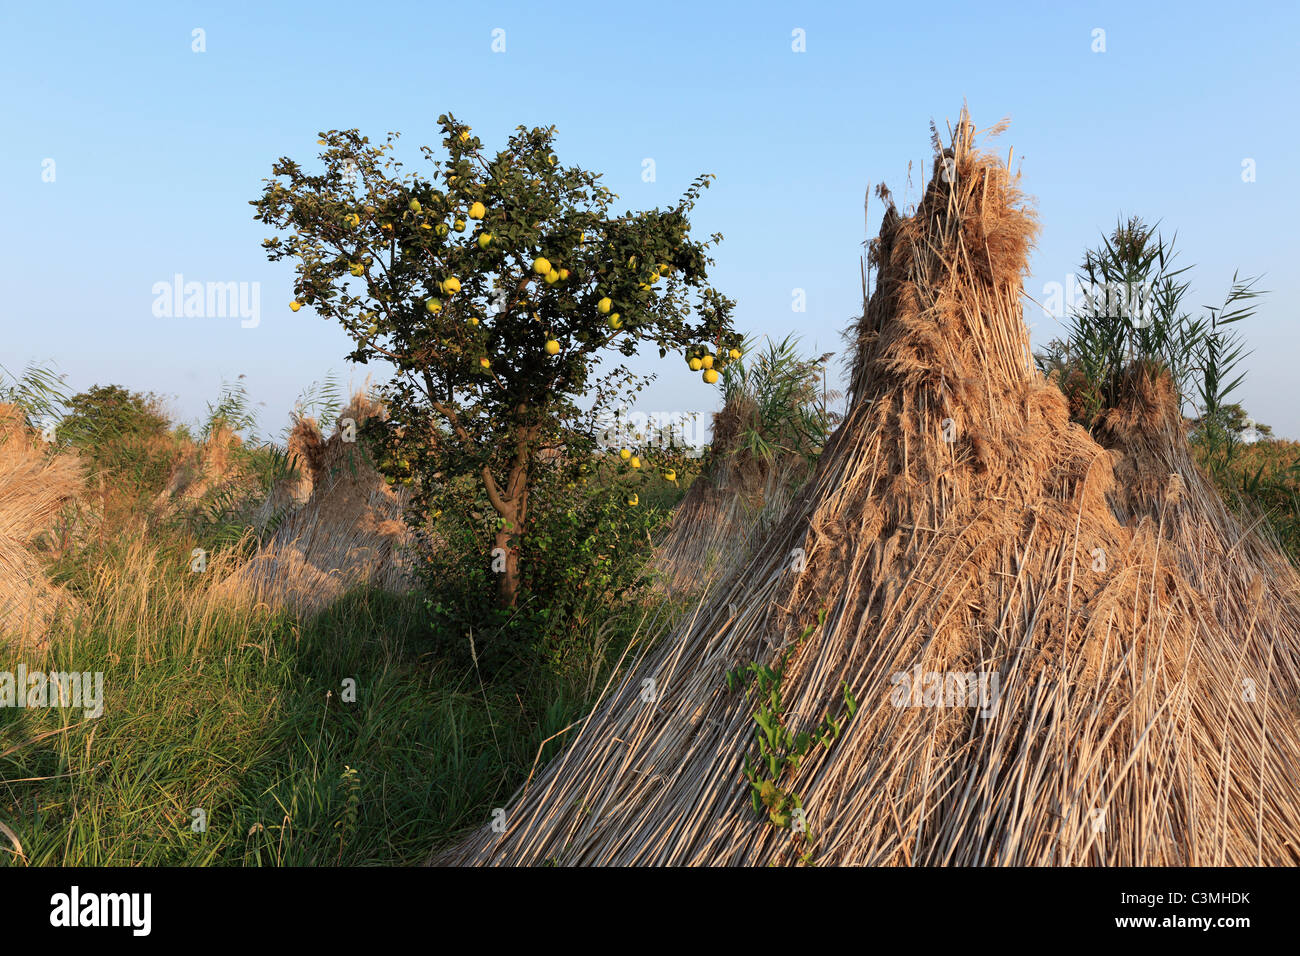 Austria, Burgenland, View of reed bundle with apple tree at lake neusiedl Stock Photo